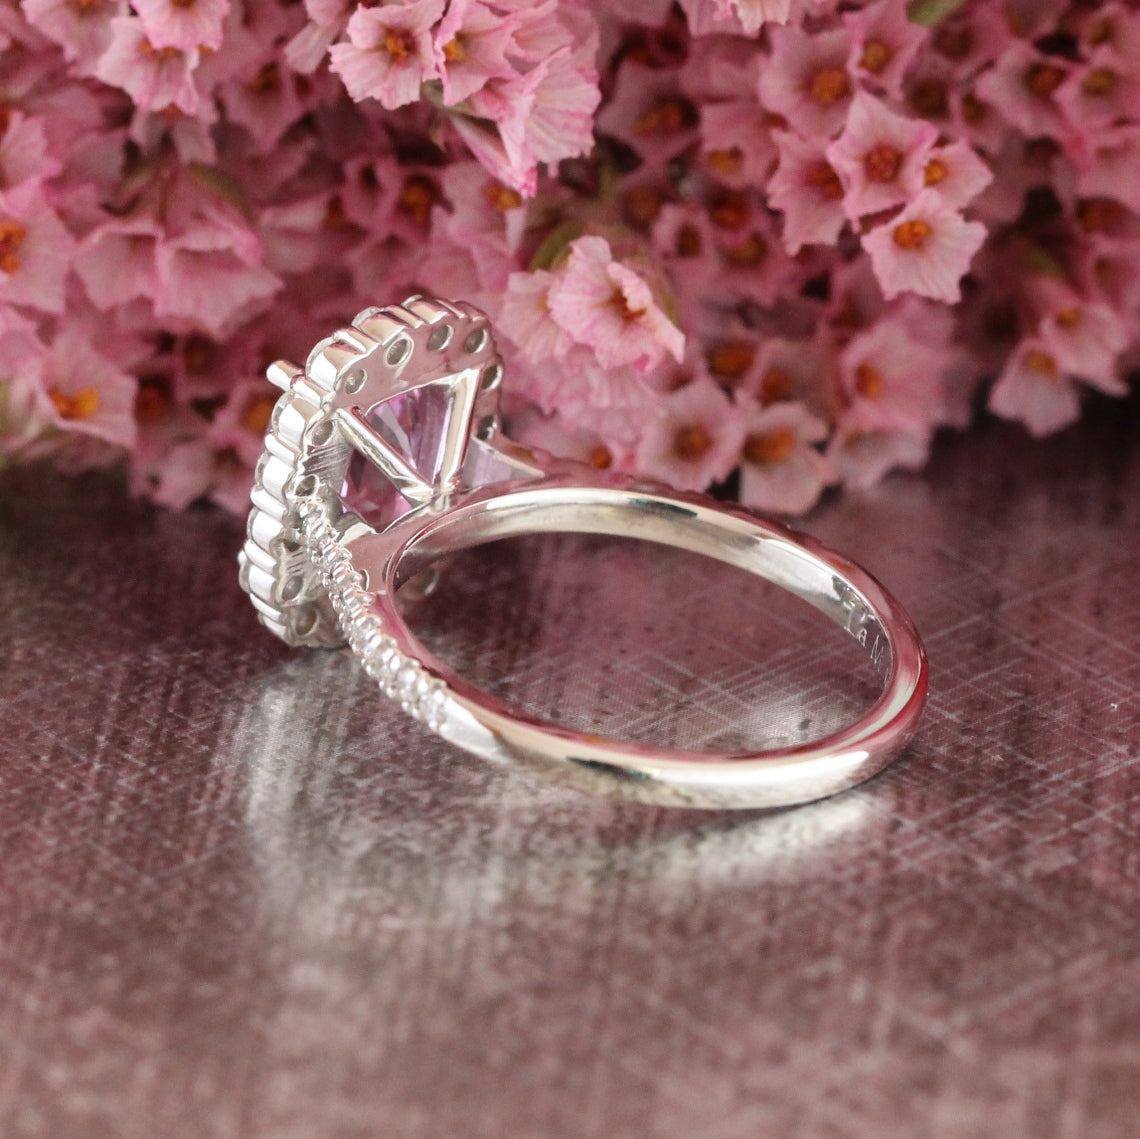 Large Cushion Natural Pink Sapphire Ring in 18k White Gold Halo Diamond, Size 6.25